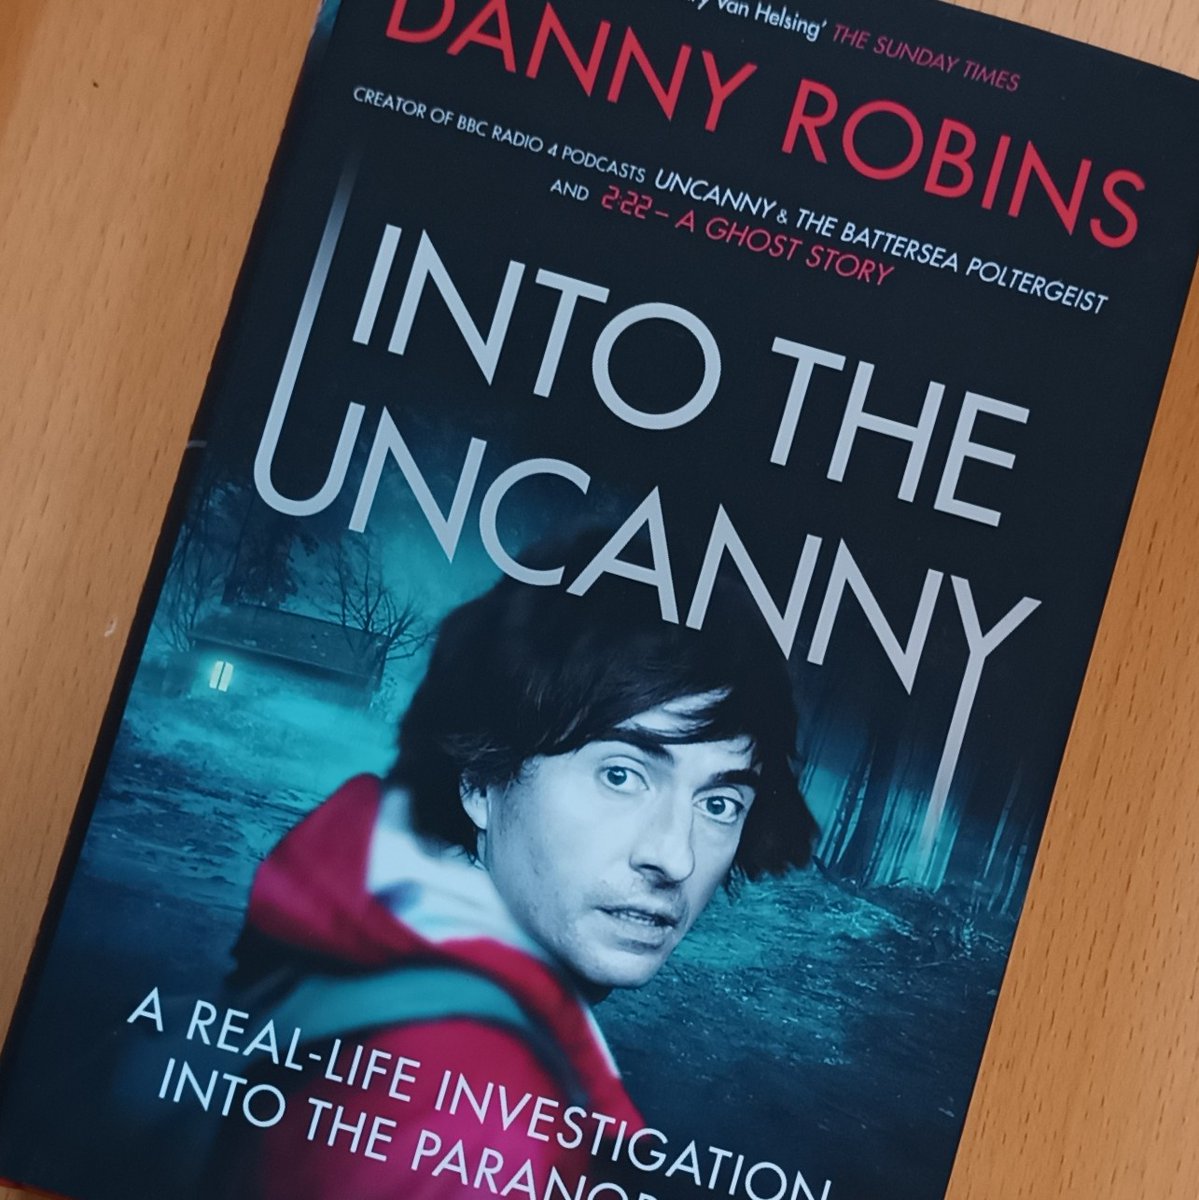 I'm looking forward to dipping into this for some creepiness.

It looks awesome @danny_robins

#Uncanny #UncannyCommunity #IntoTheUncanny #dannyrobins #paranormal #paranormalliterature #book #booklover #bookstagram #ghosts #creepy #IKnowWhatISaw